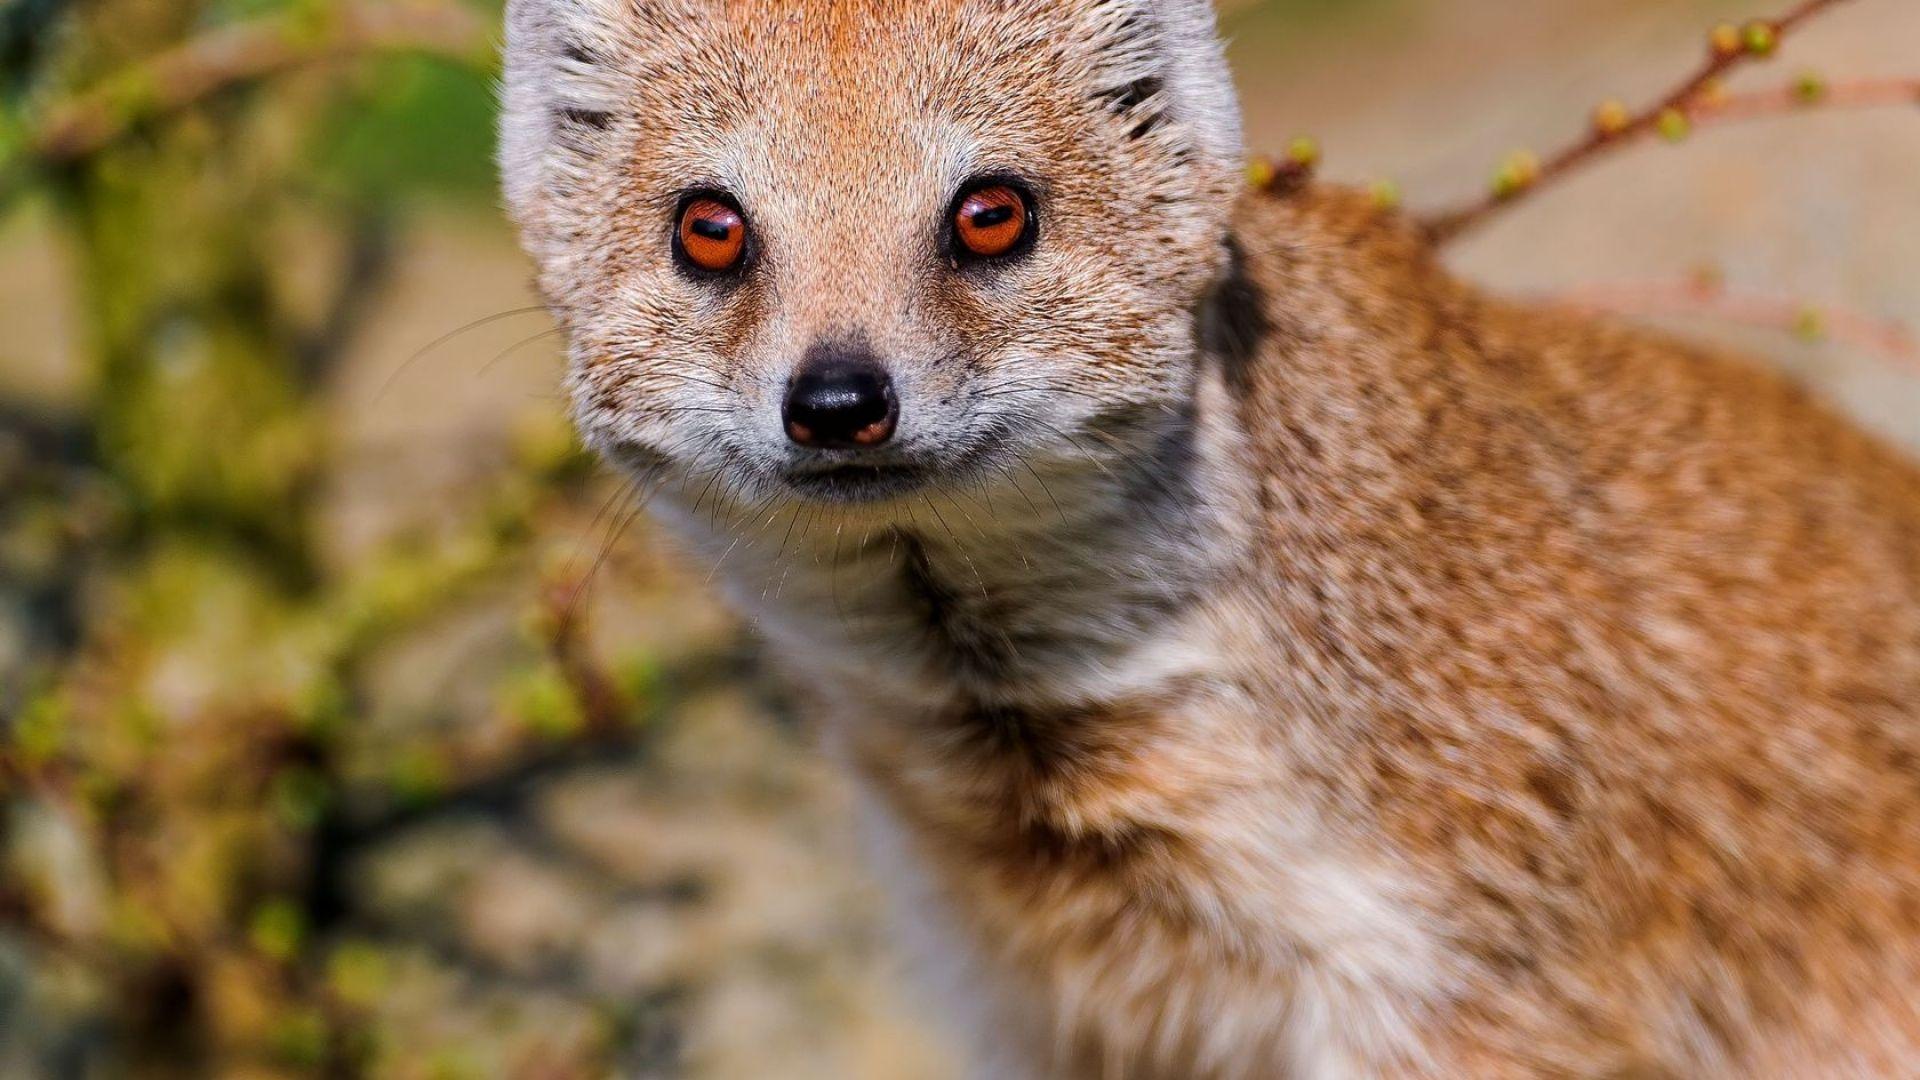 Download Wallpapers 1920x1080 mongoose, look, face, animal Full HD